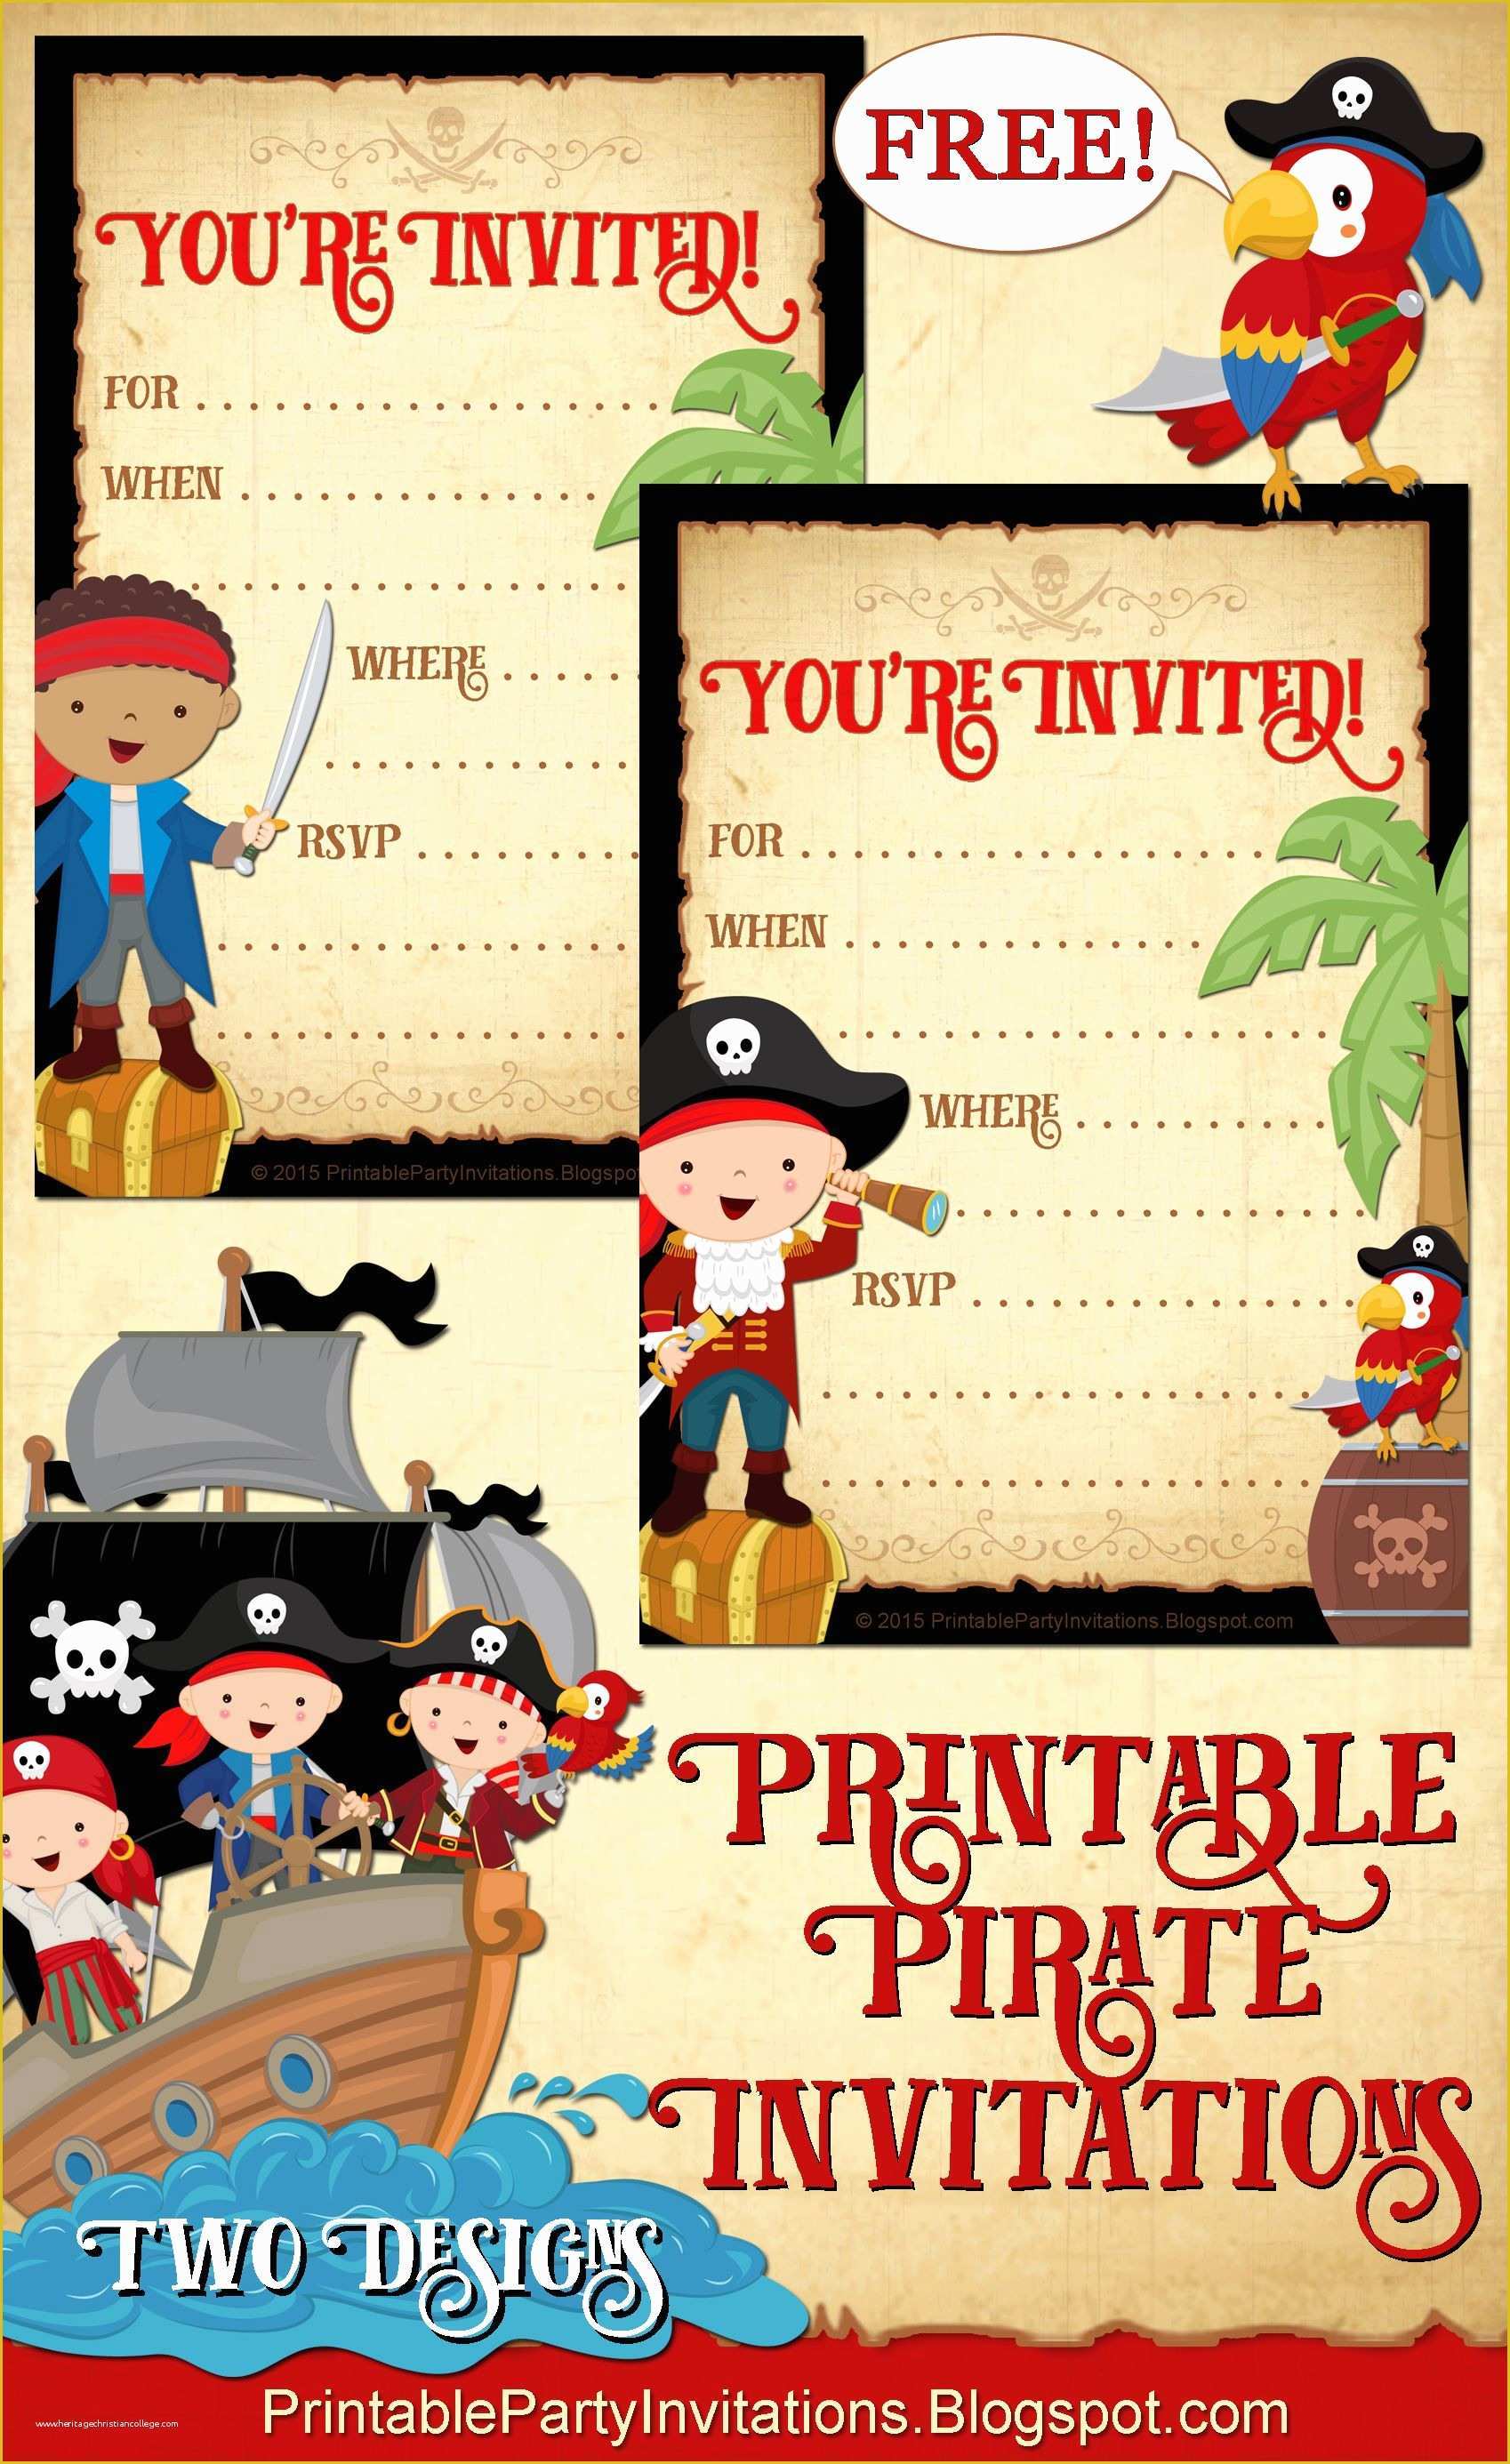 Free Pirate Invitation Template Of Free Printable Pirate Party Invitations 2 Designs